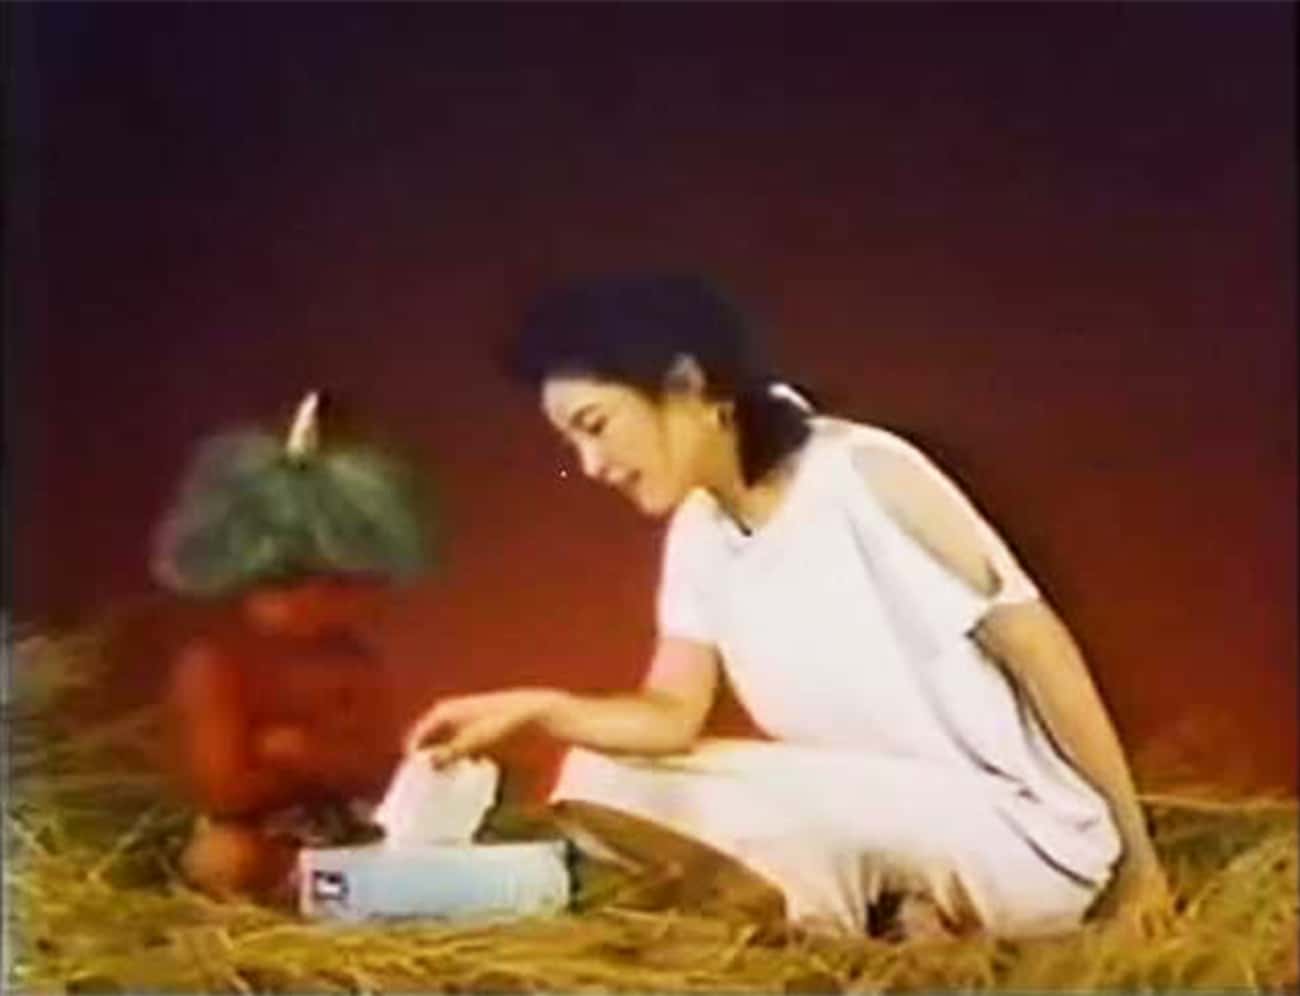 The Unsettling Commercial Features A Woman, An Ogre Baby, And An Eerie Song